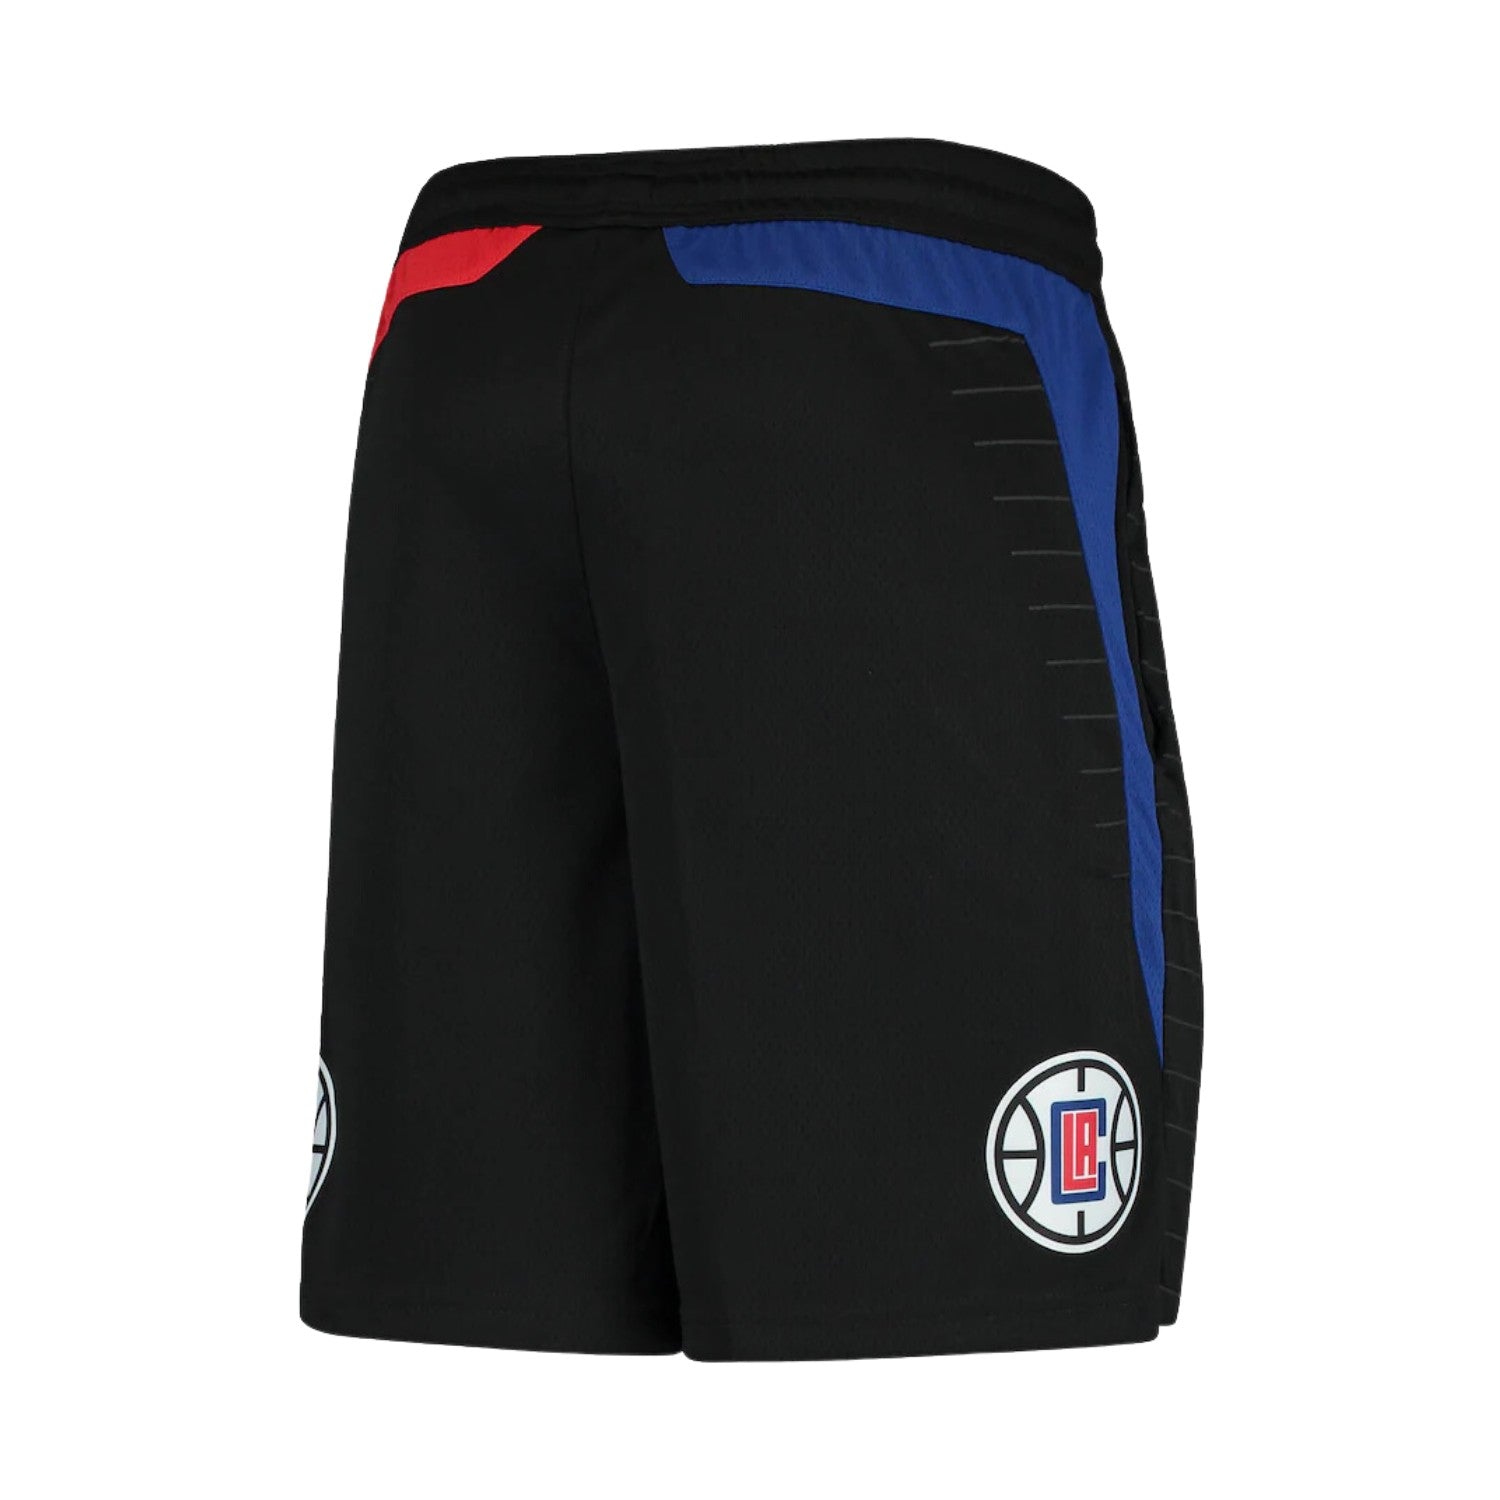 Nike Nba Los Angeles Clippers Statement Edition Swingman Shorts Mens Style : Cv9563